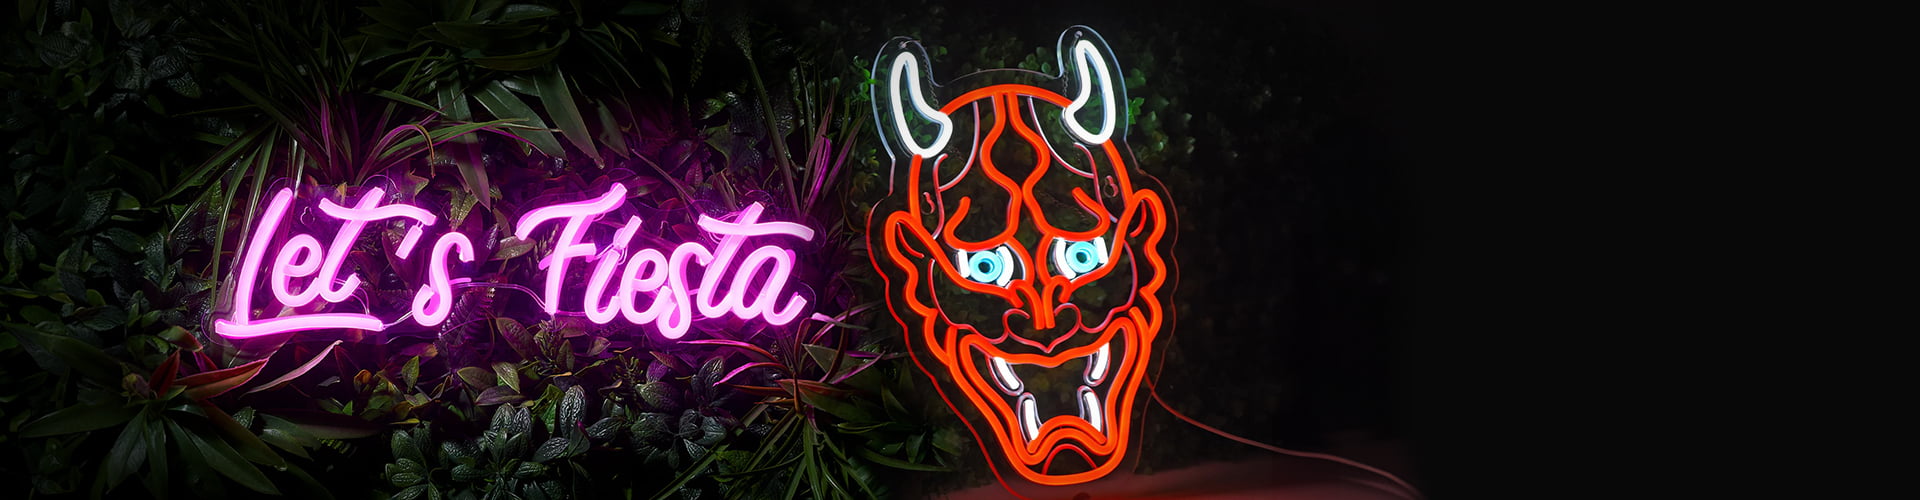 Personalized Neon Signs